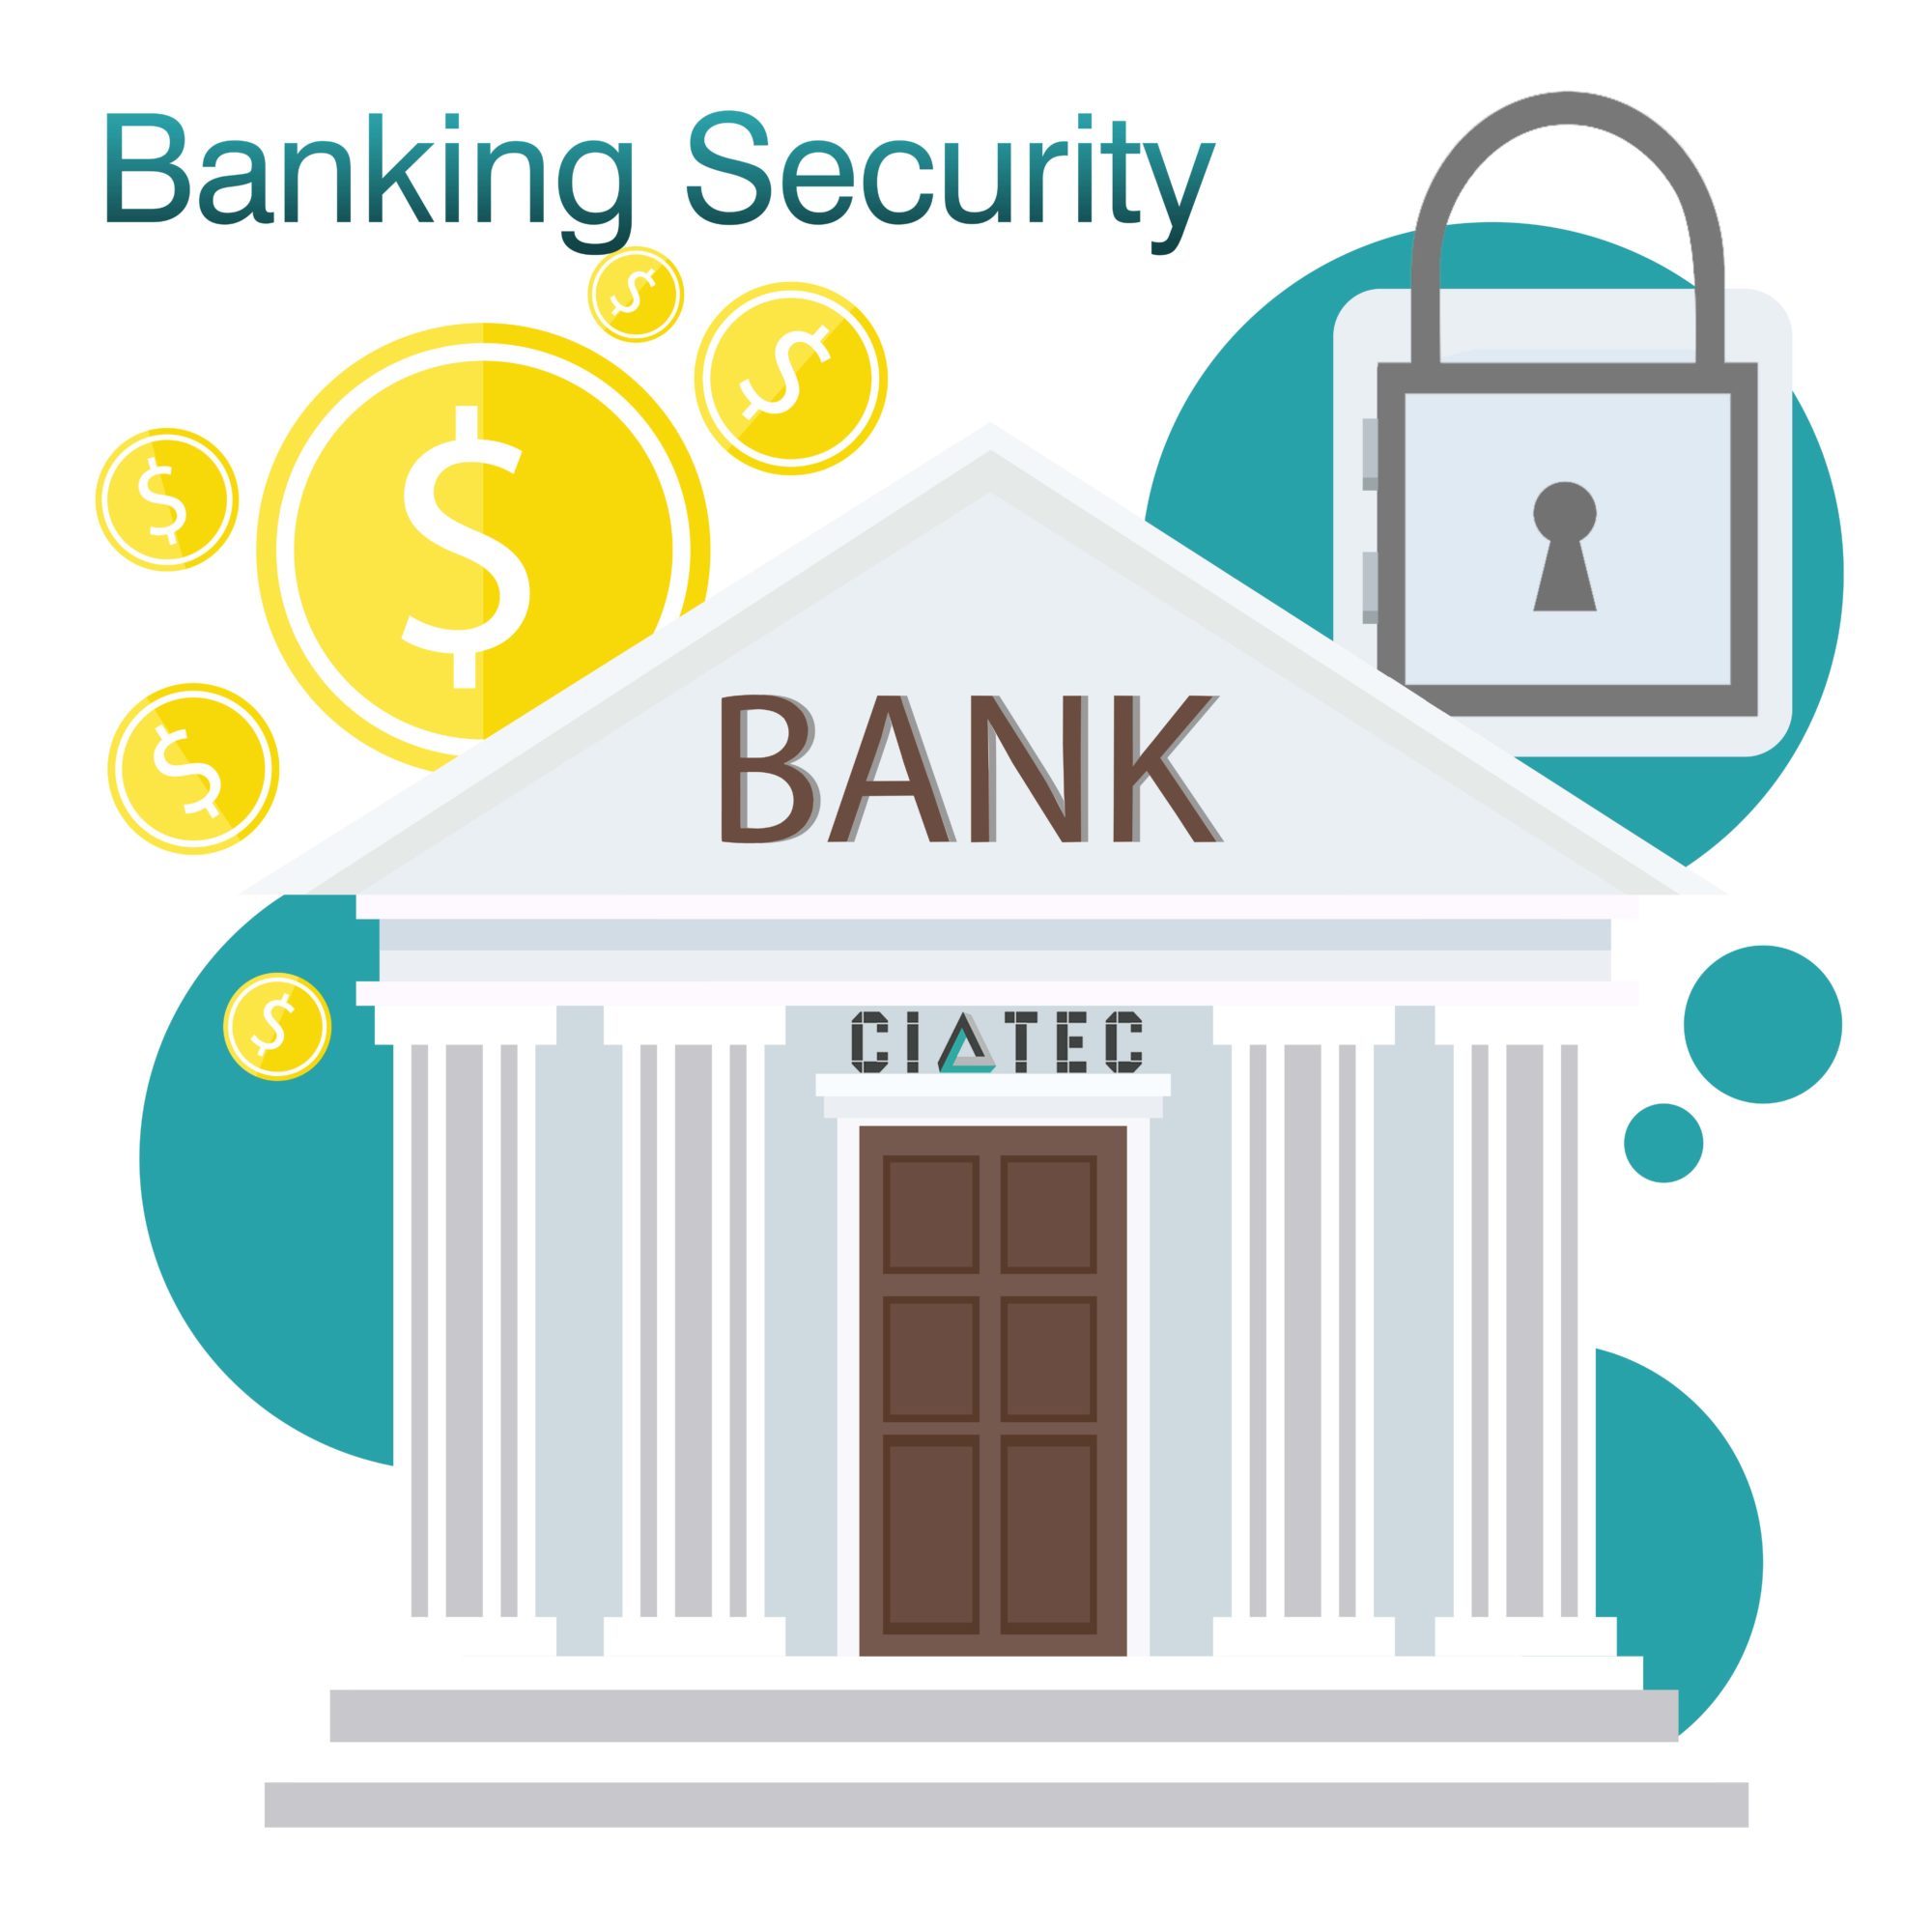 Information Security in Banking Sector